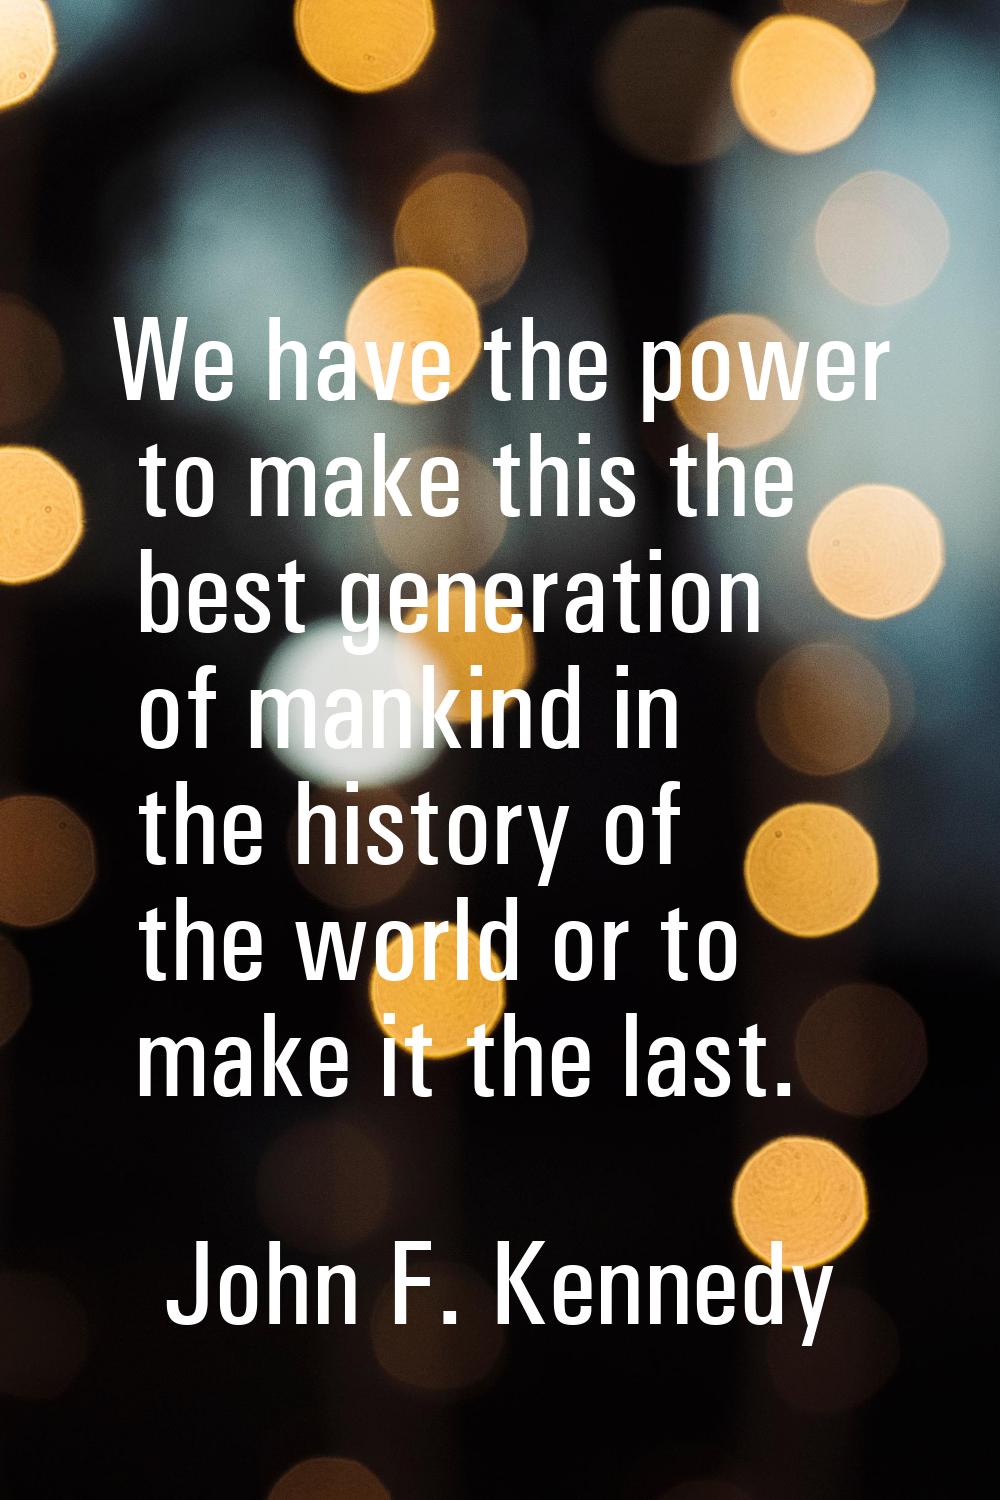 We have the power to make this the best generation of mankind in the history of the world or to mak